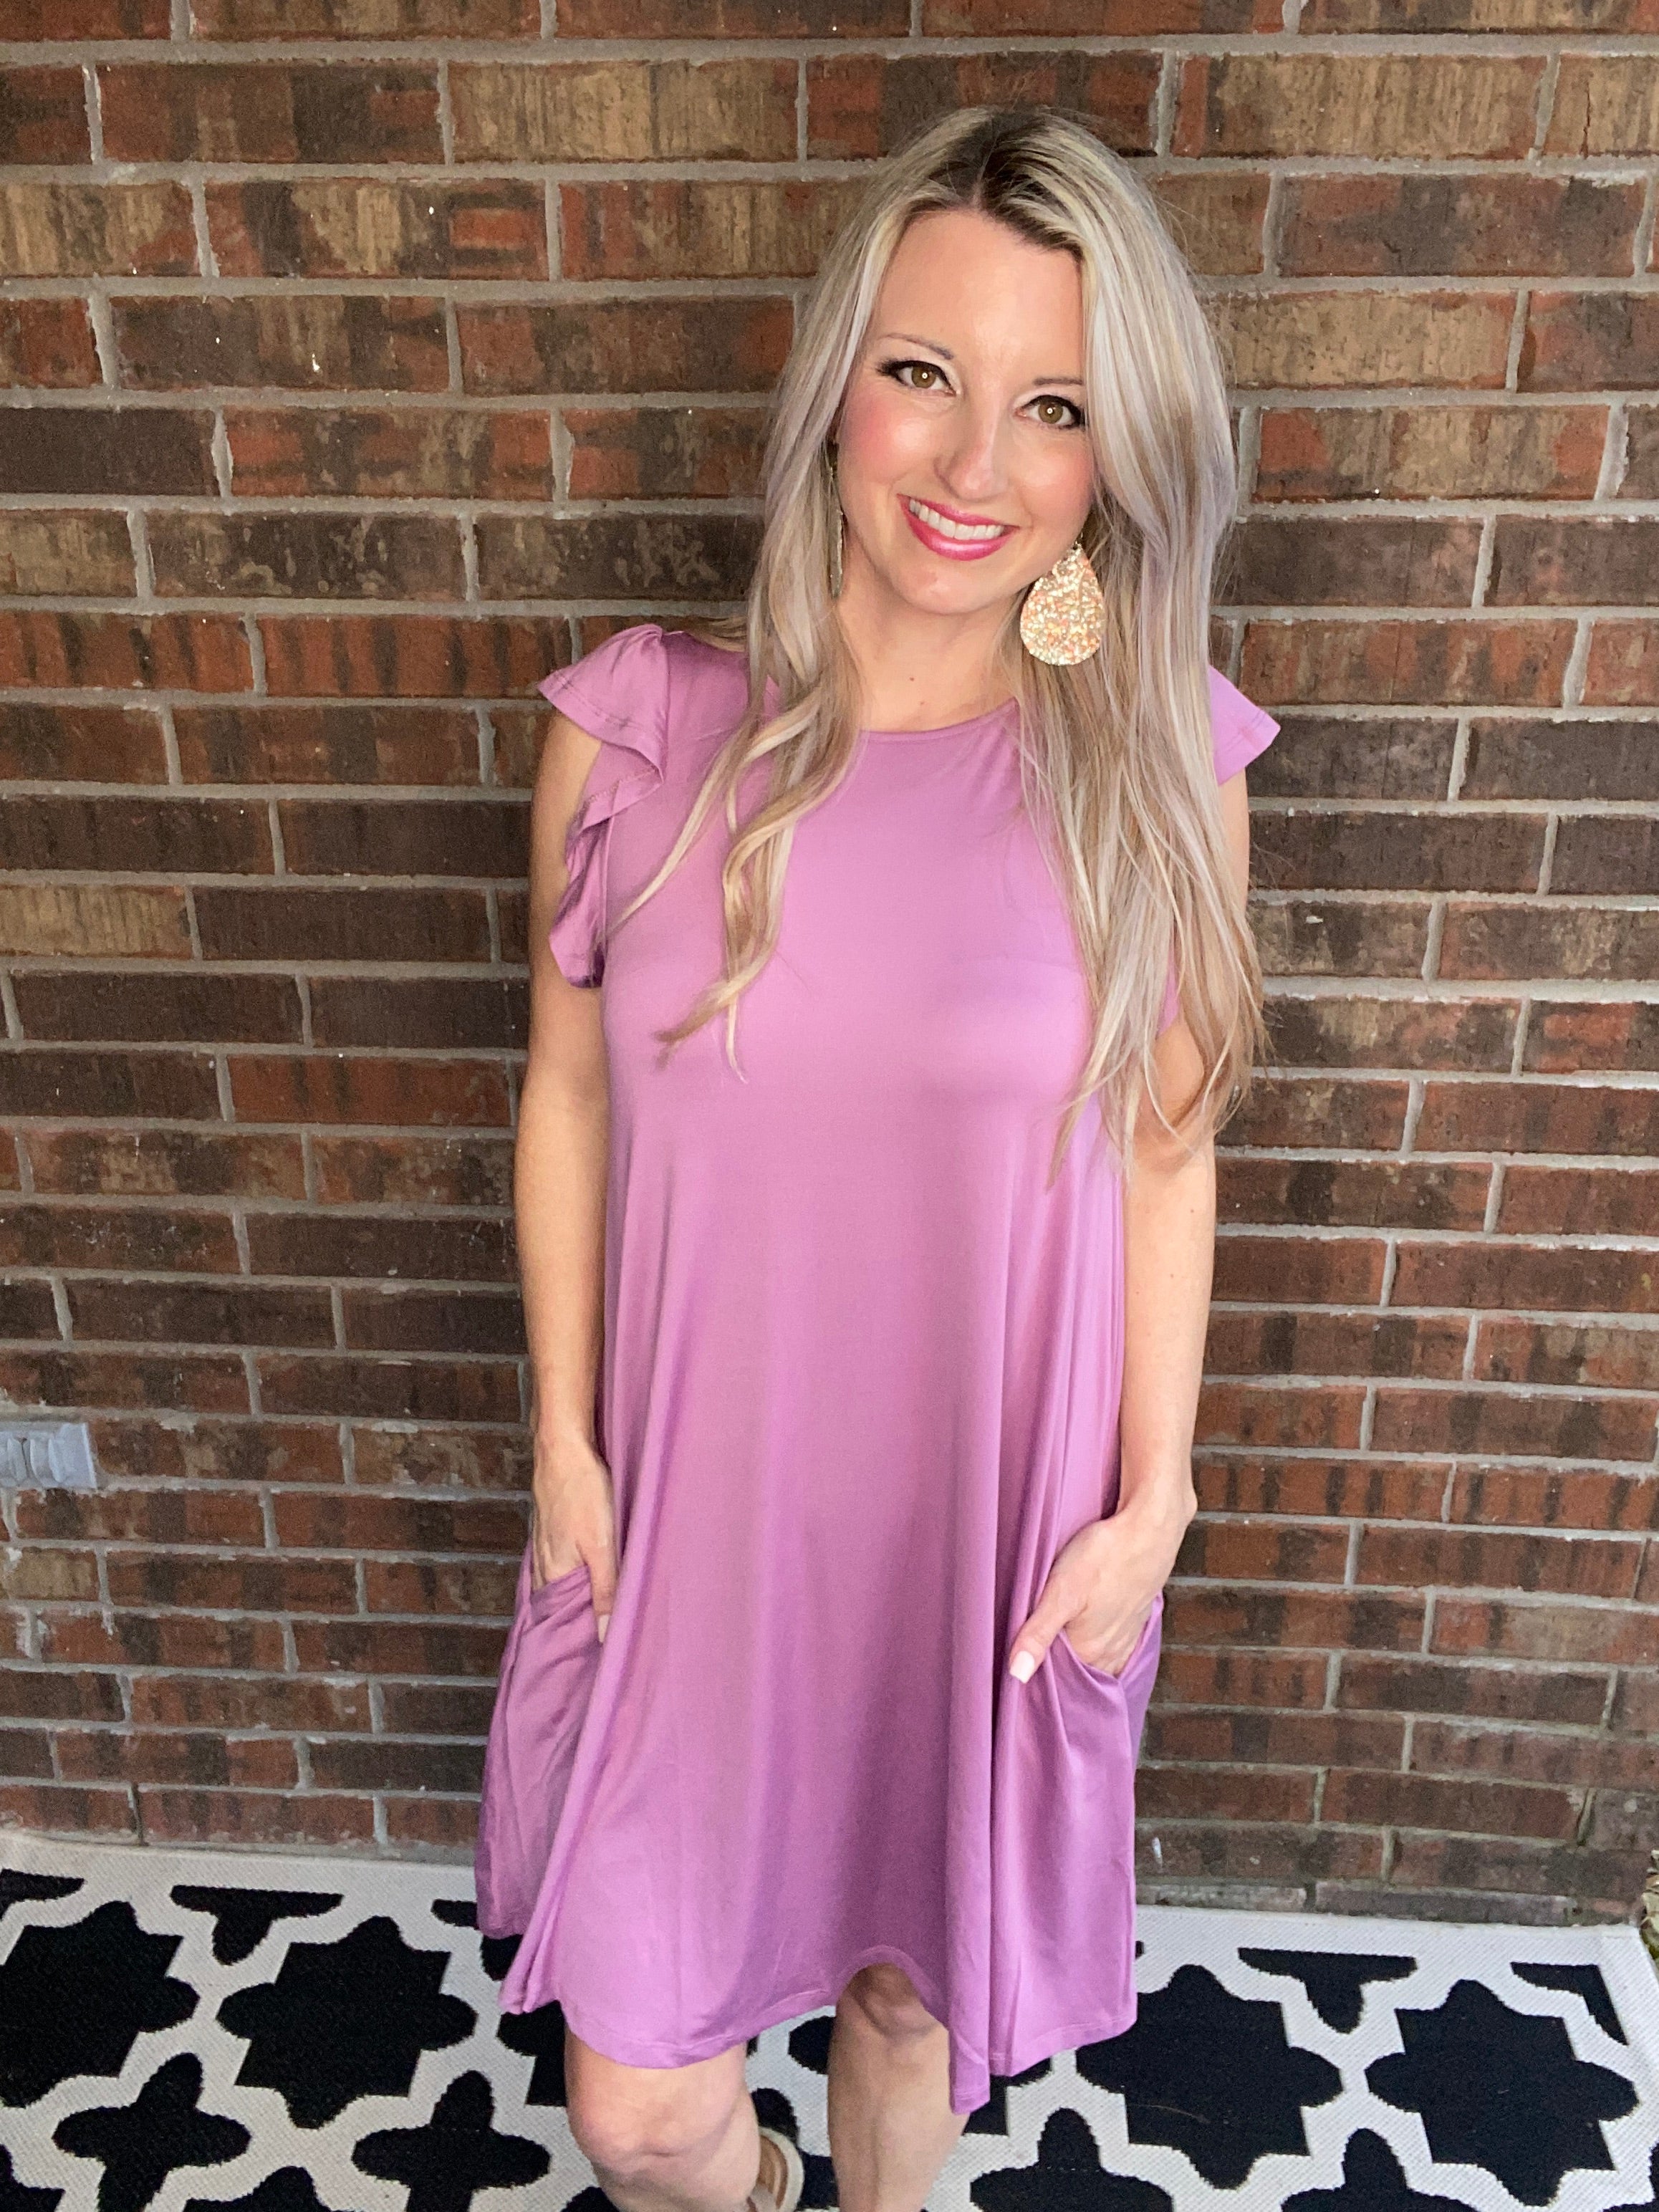 No Worries Dress in Lilac